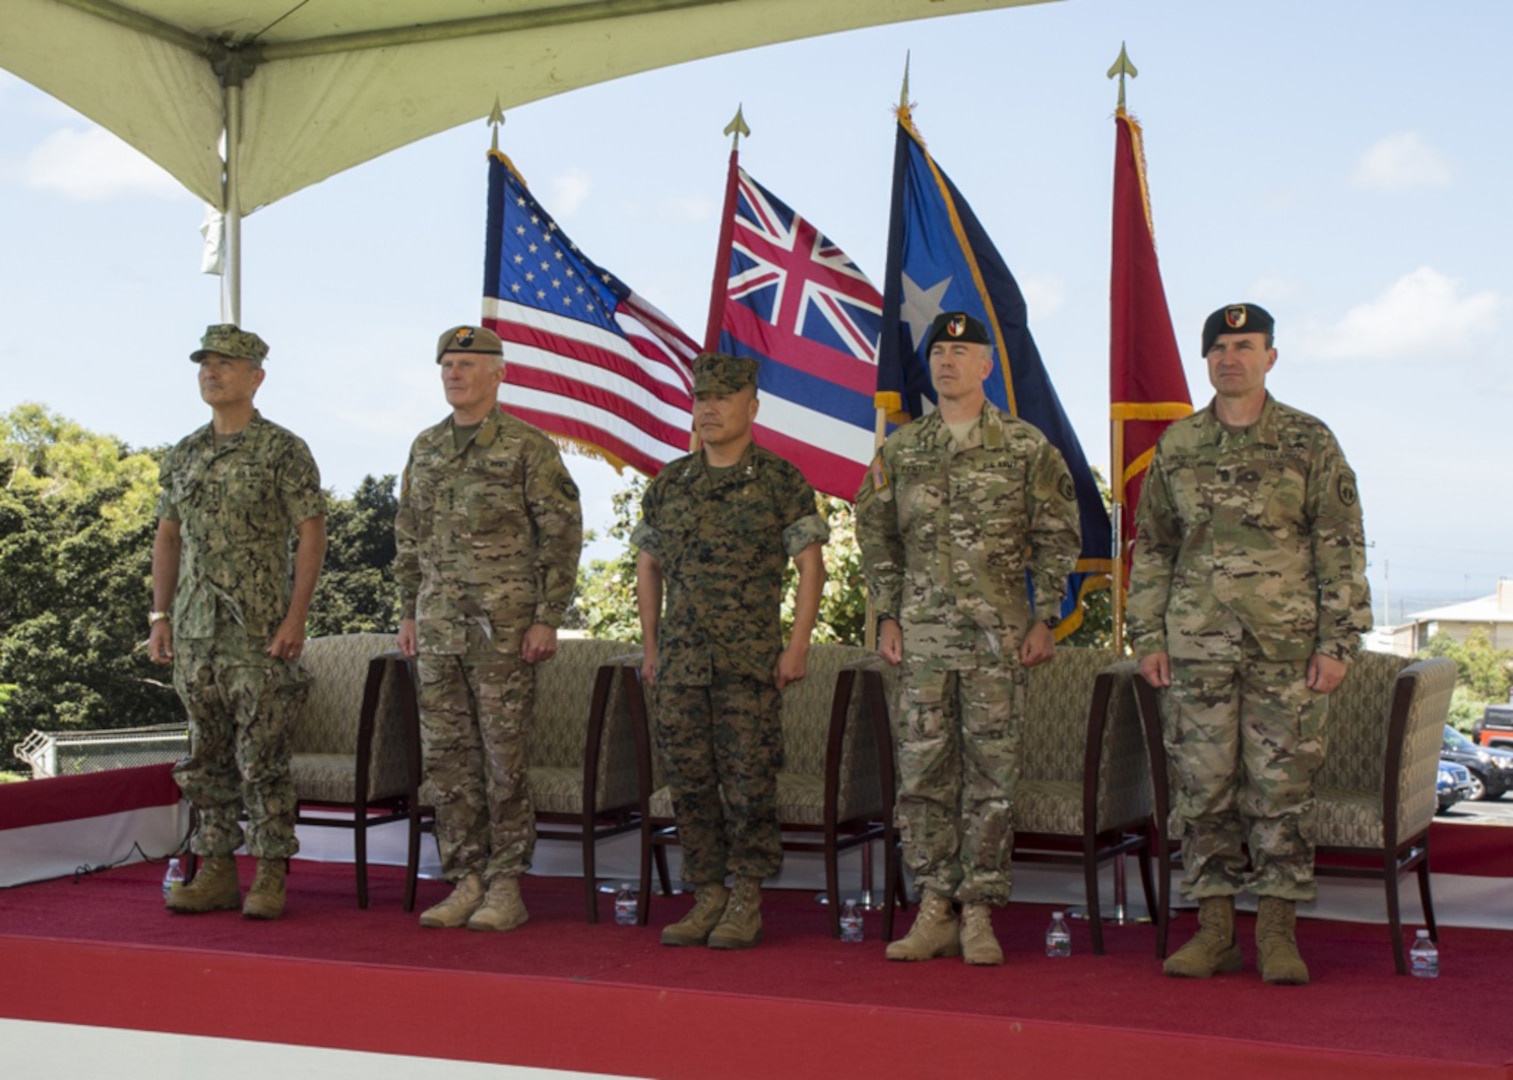 Navy Adm. Harry B. Harris, commander of U.S. Pacific Command, left, Army Gen. Raymond A. Thomas, commander, U.S. Special Operations Command, Marine Corps Maj. Gen. Daniel D. Yoo, commander, U.S. Special Operations Command, Pacific (SOCPAC), Army Maj. Gen. Bryan P. Fenton, and Command Sgt. Maj. Shane Shorter stand during the playing of the Armed Services Medley at the conclusion of SOCPAC's Change of Command ceremony, May 12, 2017